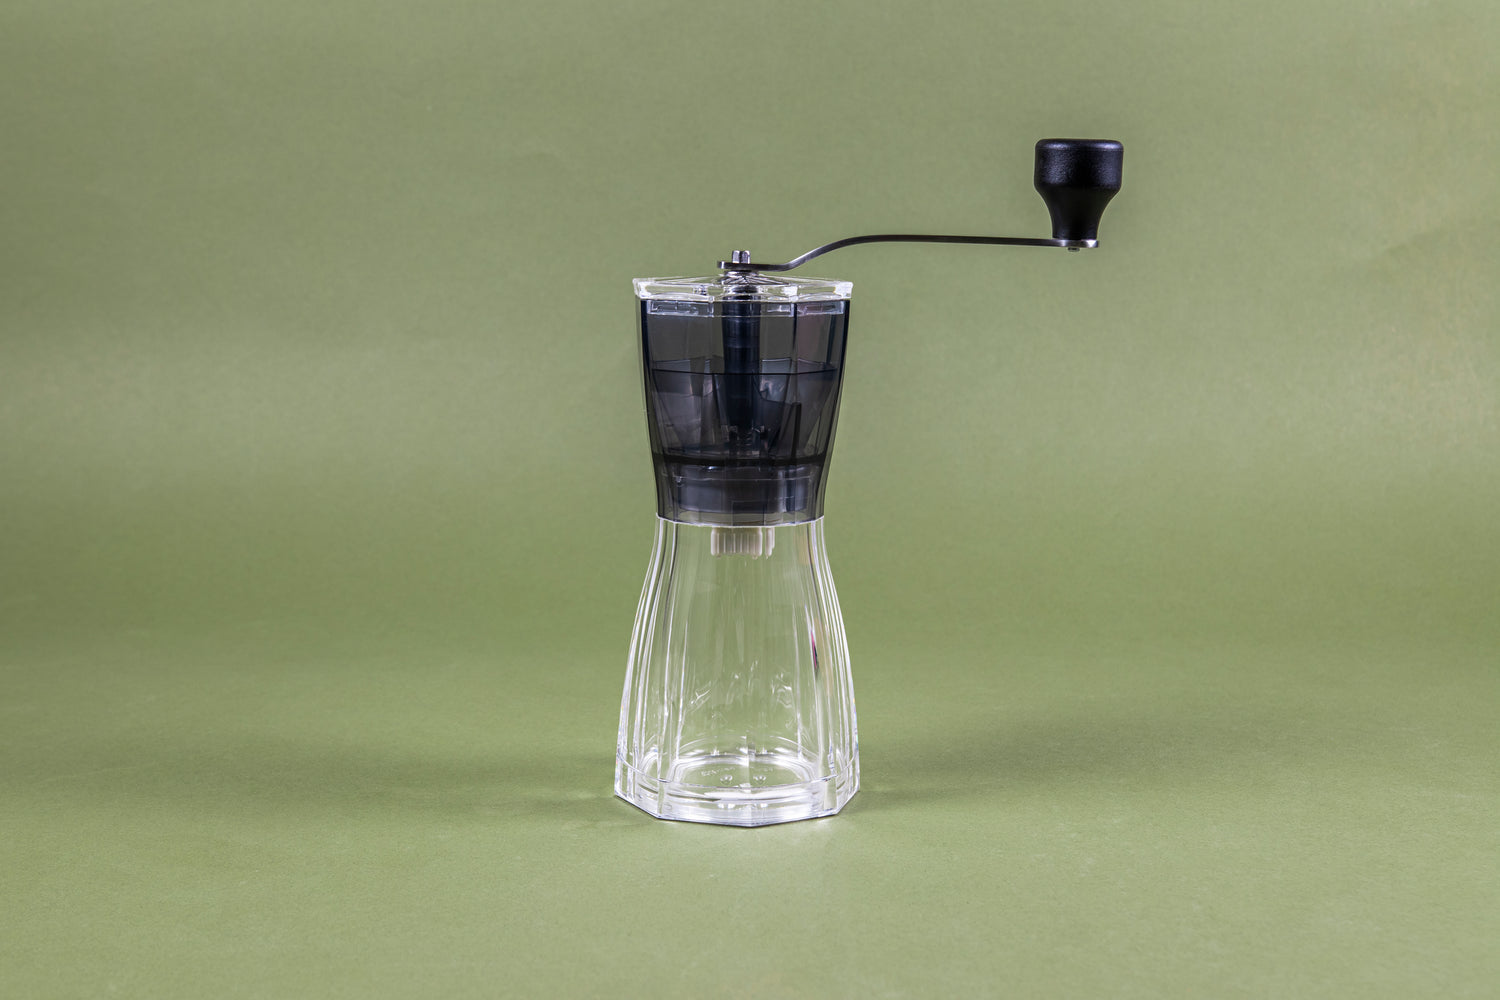 Clear plastic resin coffee hand grinder with hour-glass, octogonally shaped body, black clear plastic hopper, clear plastic lid, stainless steal handle, and black plastic knob set against a green background.